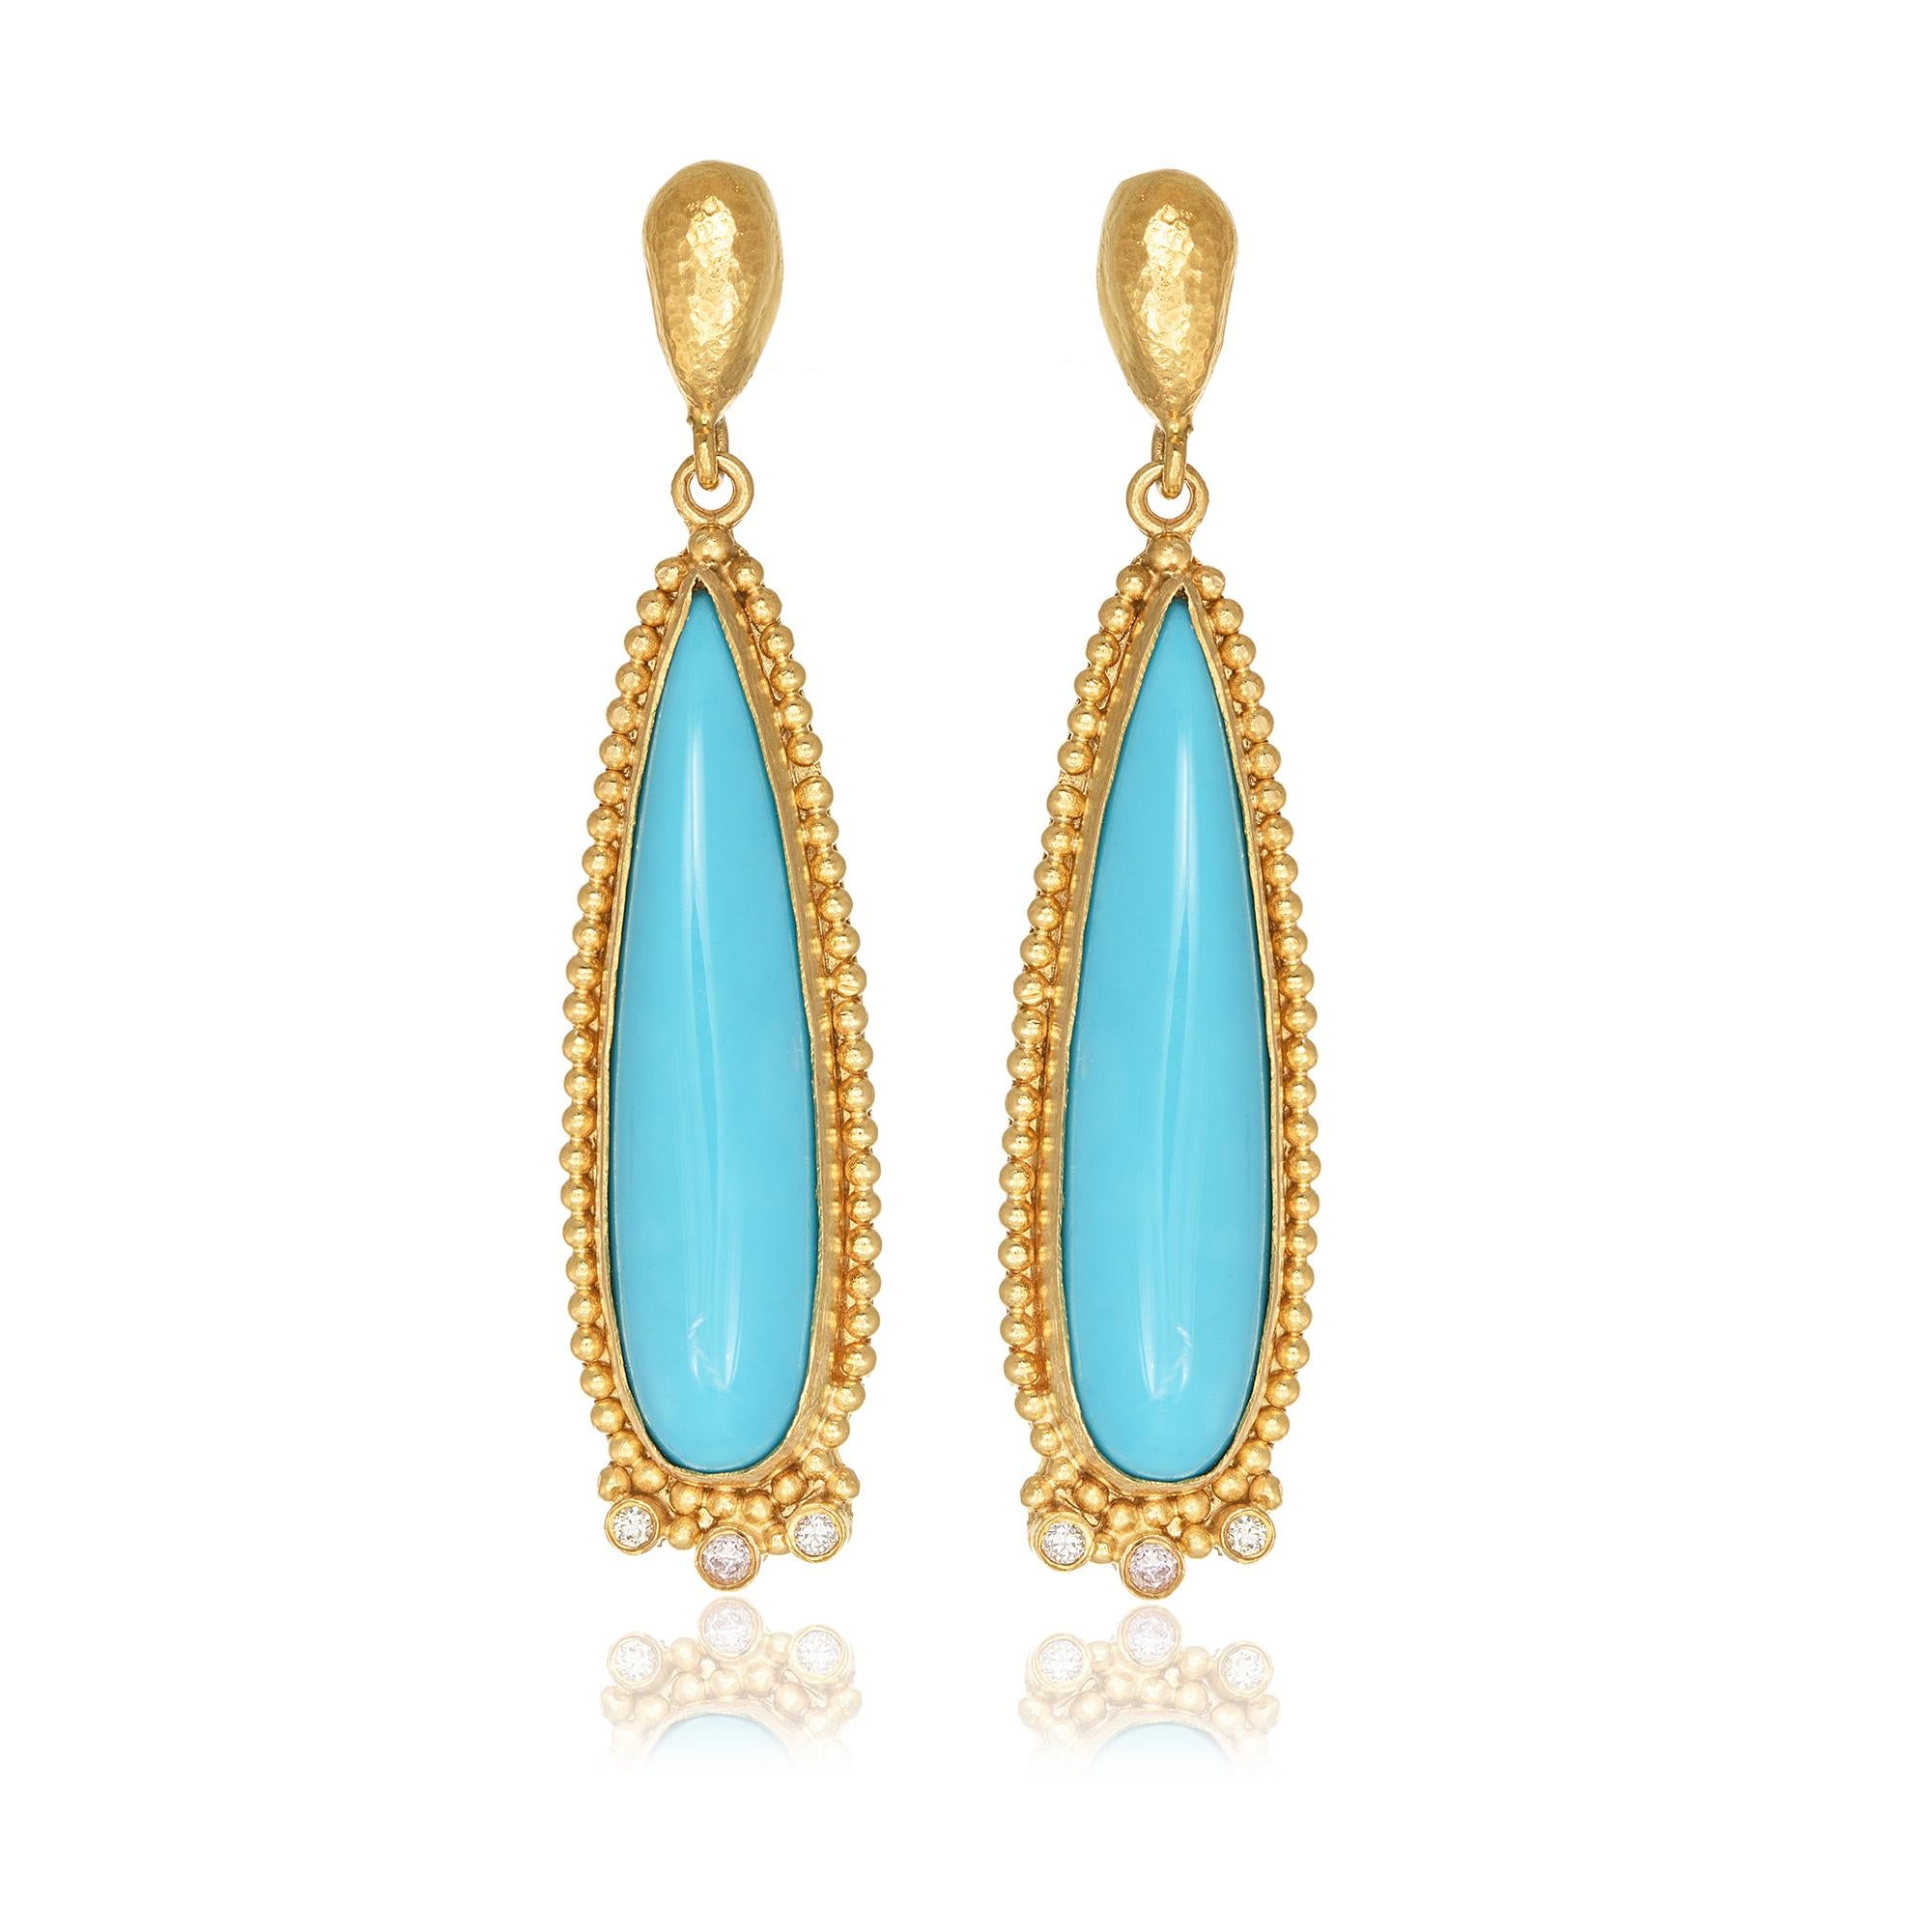 Long dangle earrings with a big pear Turquoise and three brilliant cut Diamonds, handcrafted in 22Kt yellow gold. This pair of earrings is braided accordint to the traditional techniques of hand hammering and granulation. The play of light and shade